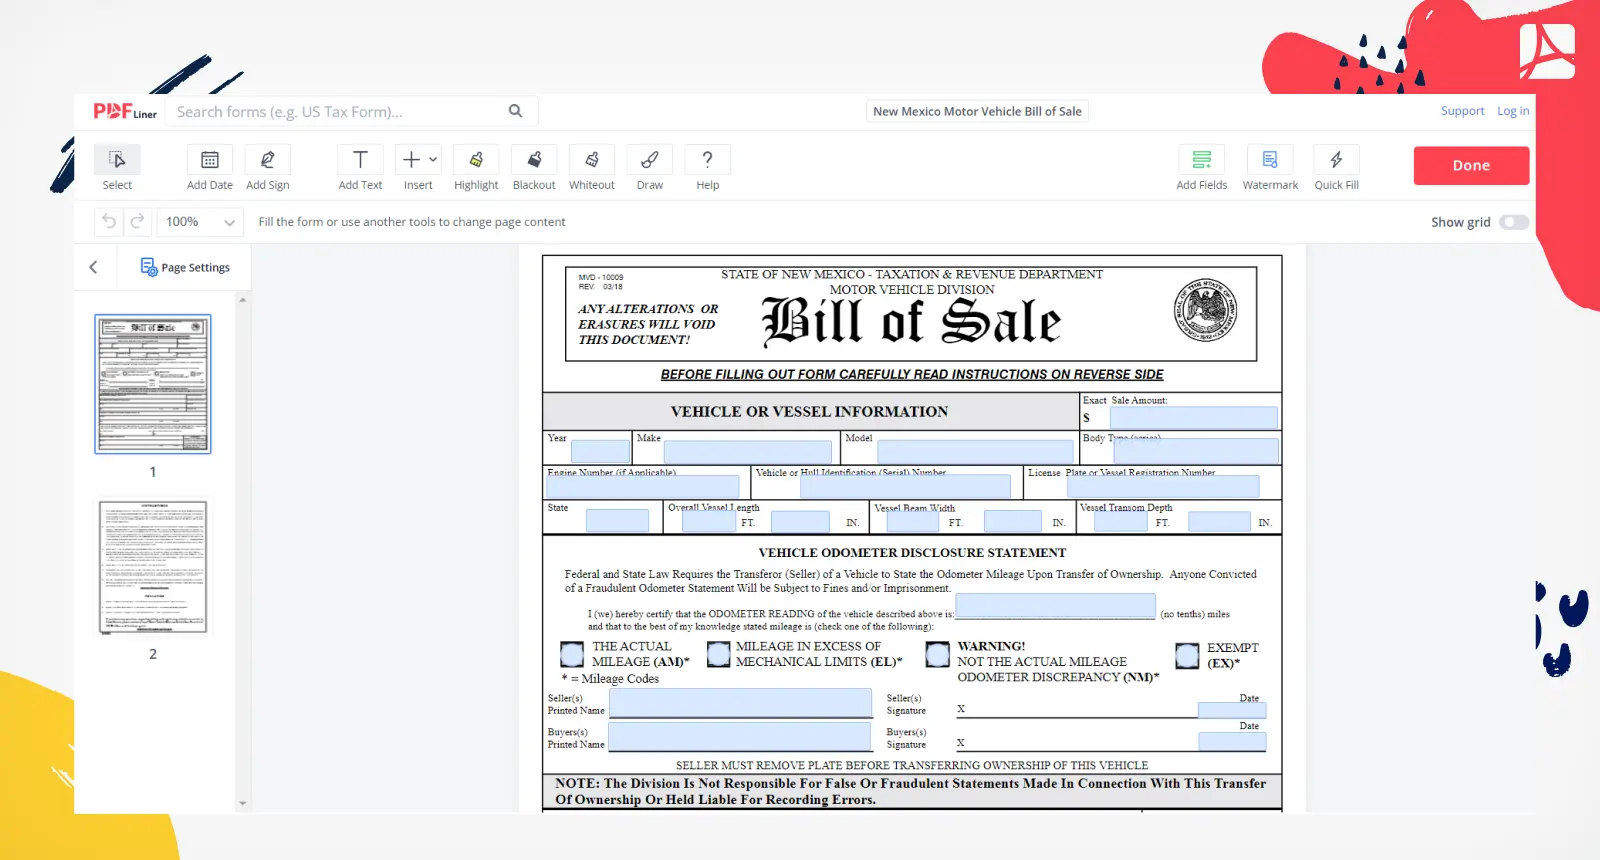 New Mexico Motor Vehicle Bill of Sale Form Screenshot